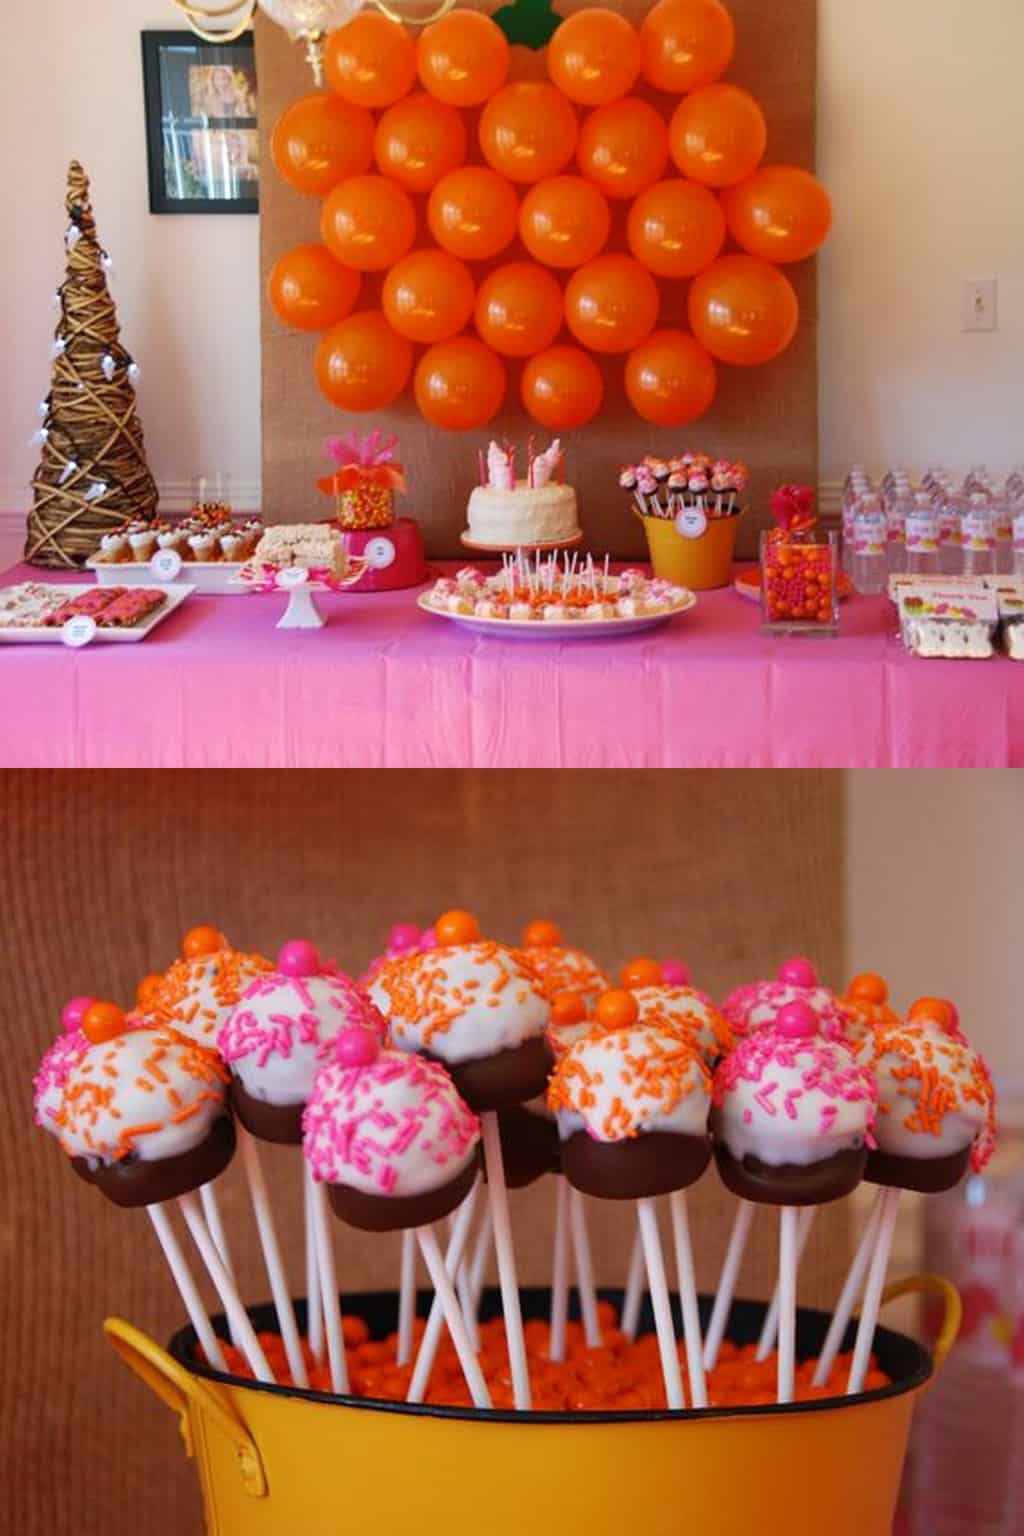 a sweet shop birthday party theme: happy 8th birthday, rian! - Foodlets